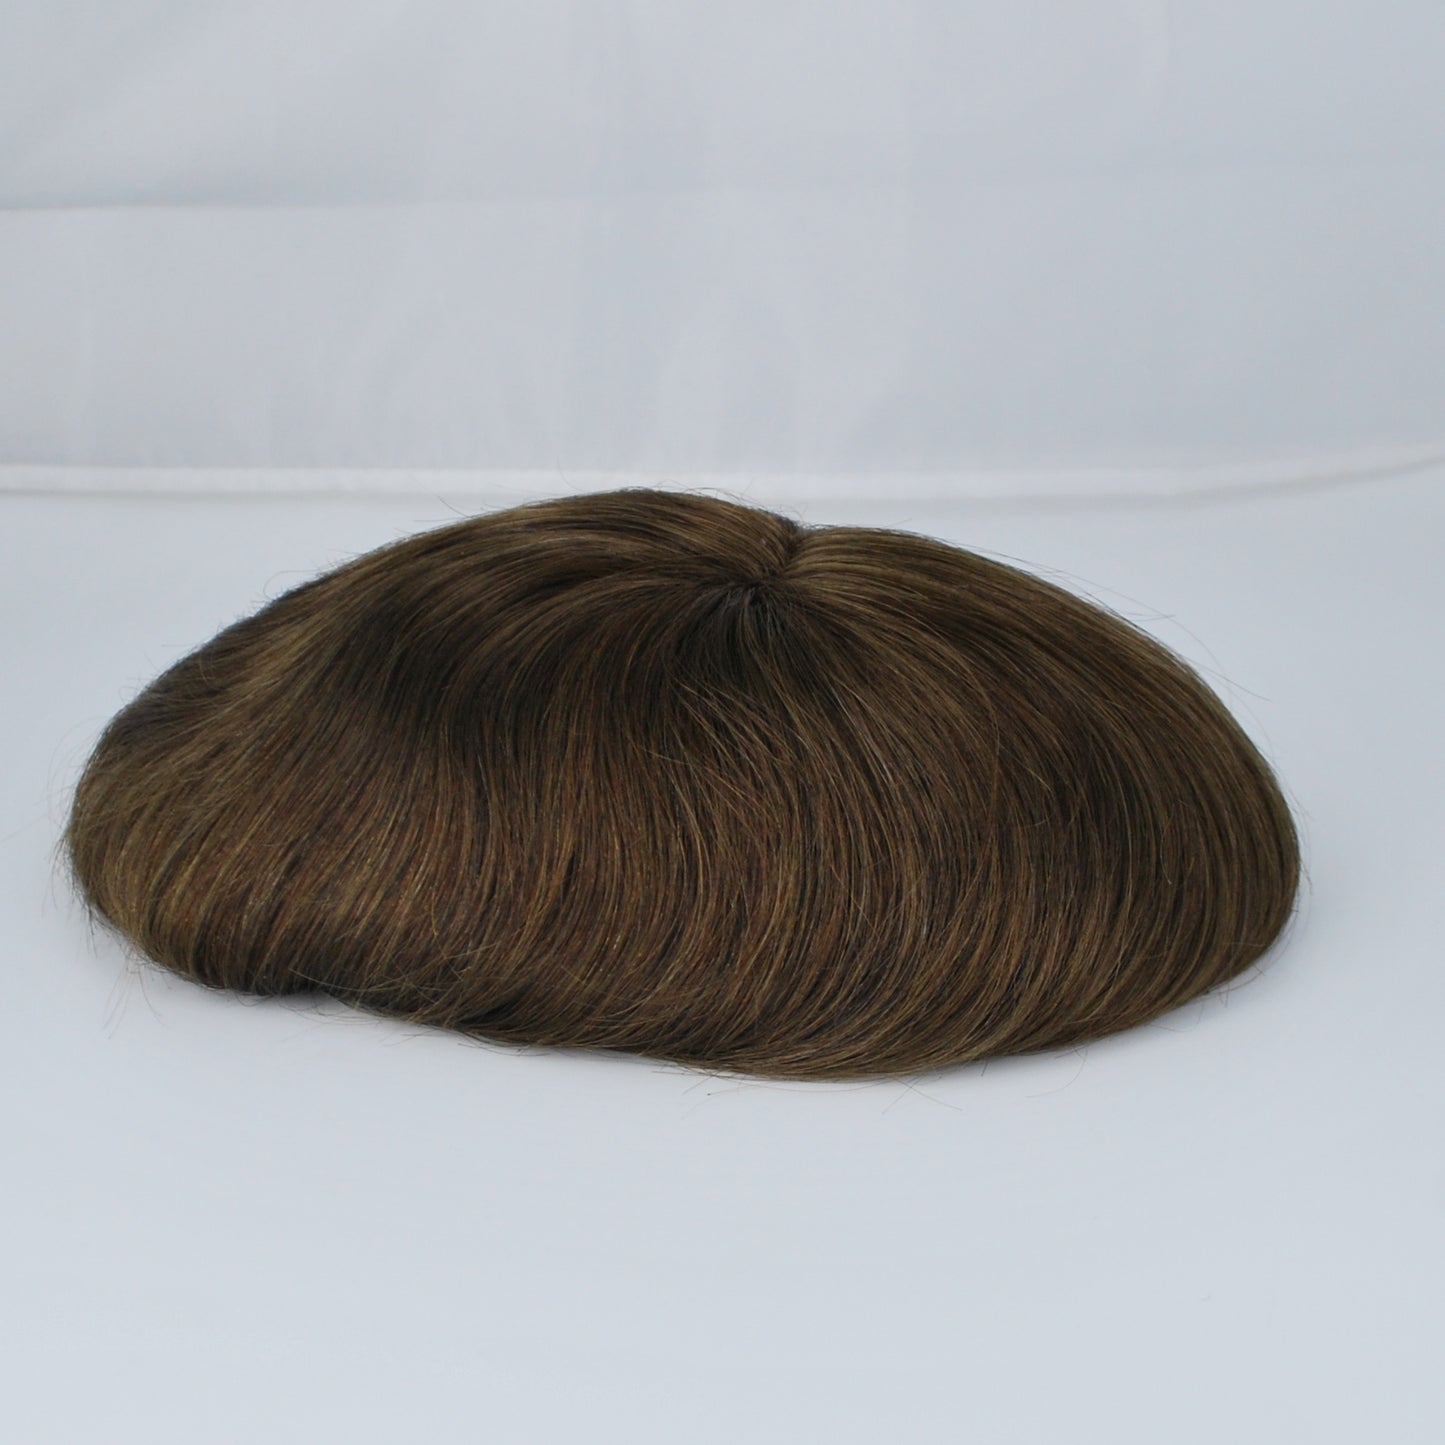 Clearance toupee wig for men lace front French lace with PU around #4 medium brown 9x6.25"